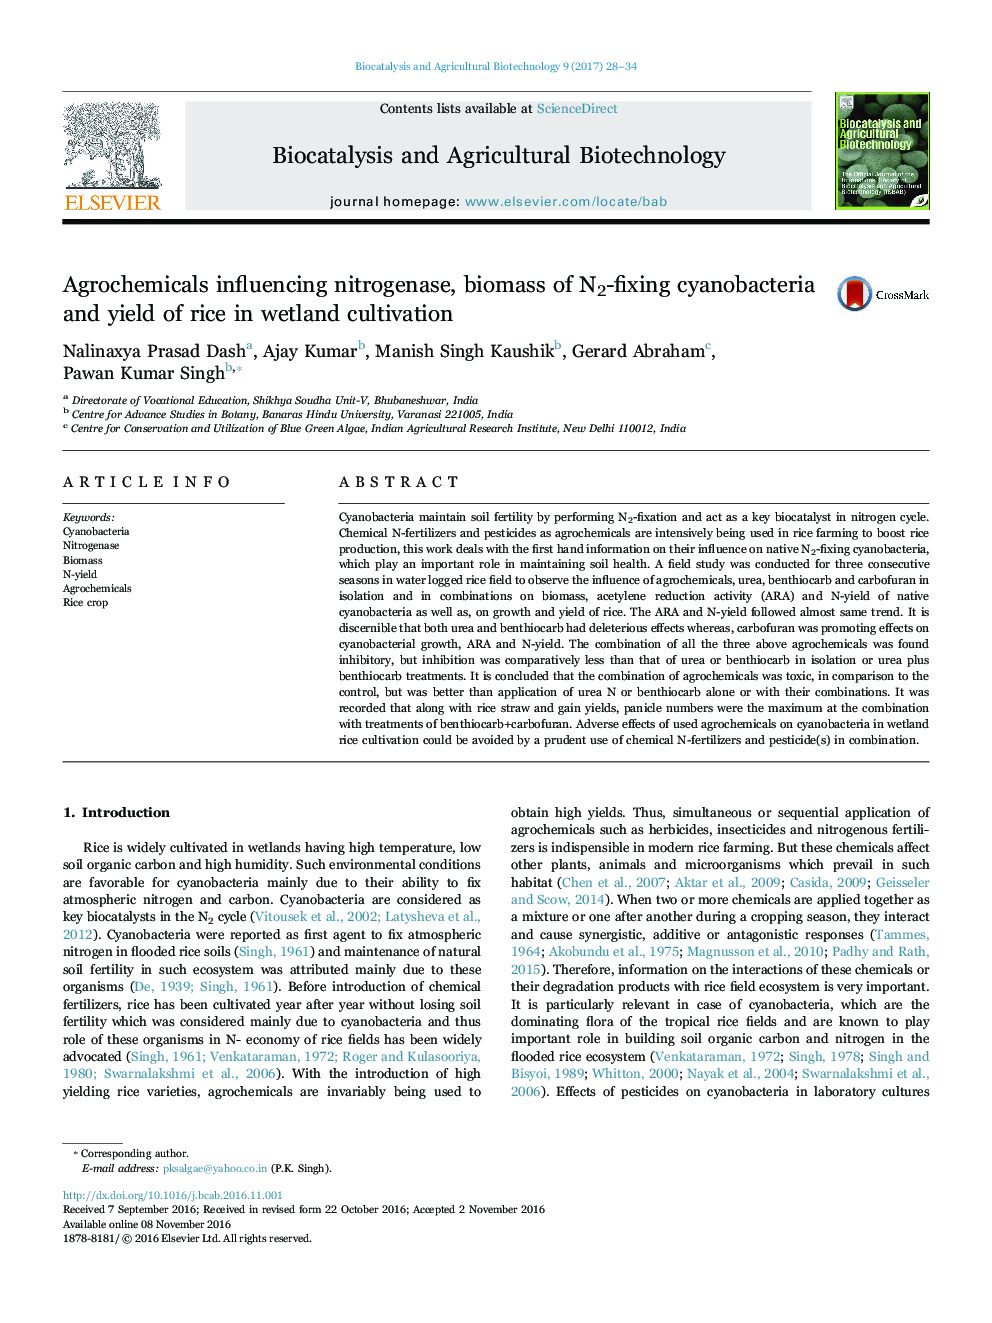 Agrochemicals influencing nitrogenase, biomass of N2-fixing cyanobacteria and yield of rice in wetland cultivation